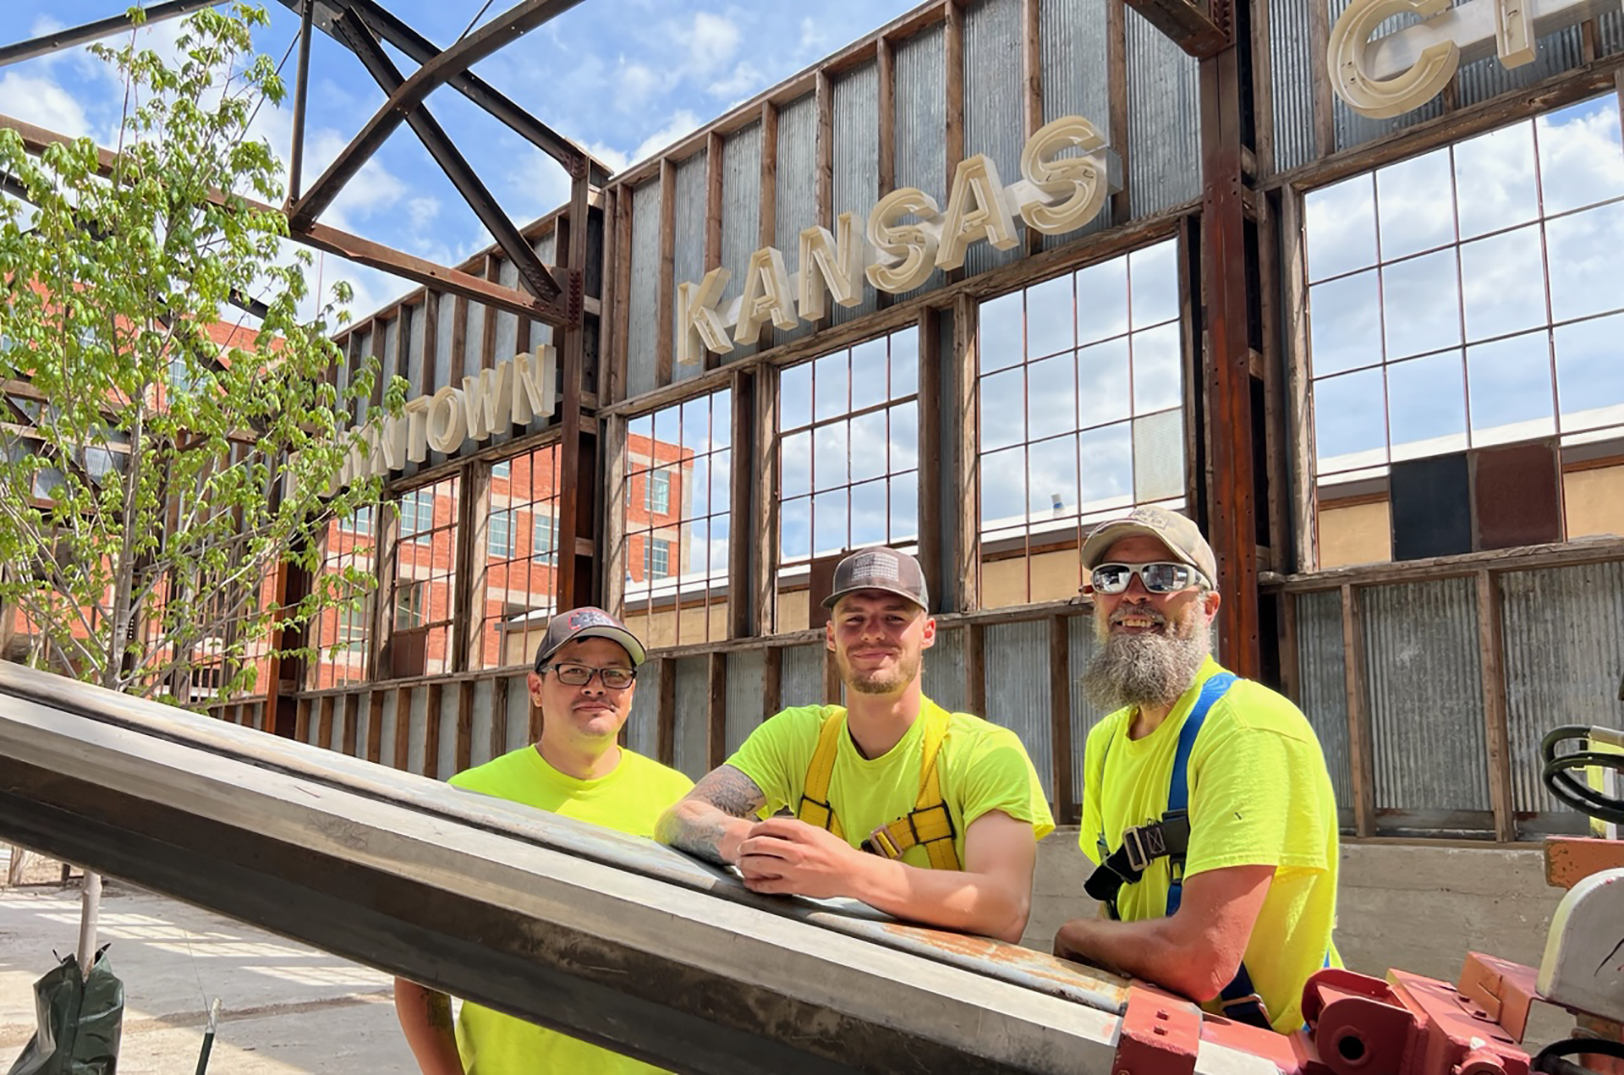 ‘Neon Alley’ turning on 40 historic KC signs at Pennway Point, lighting the way to new entertainment district